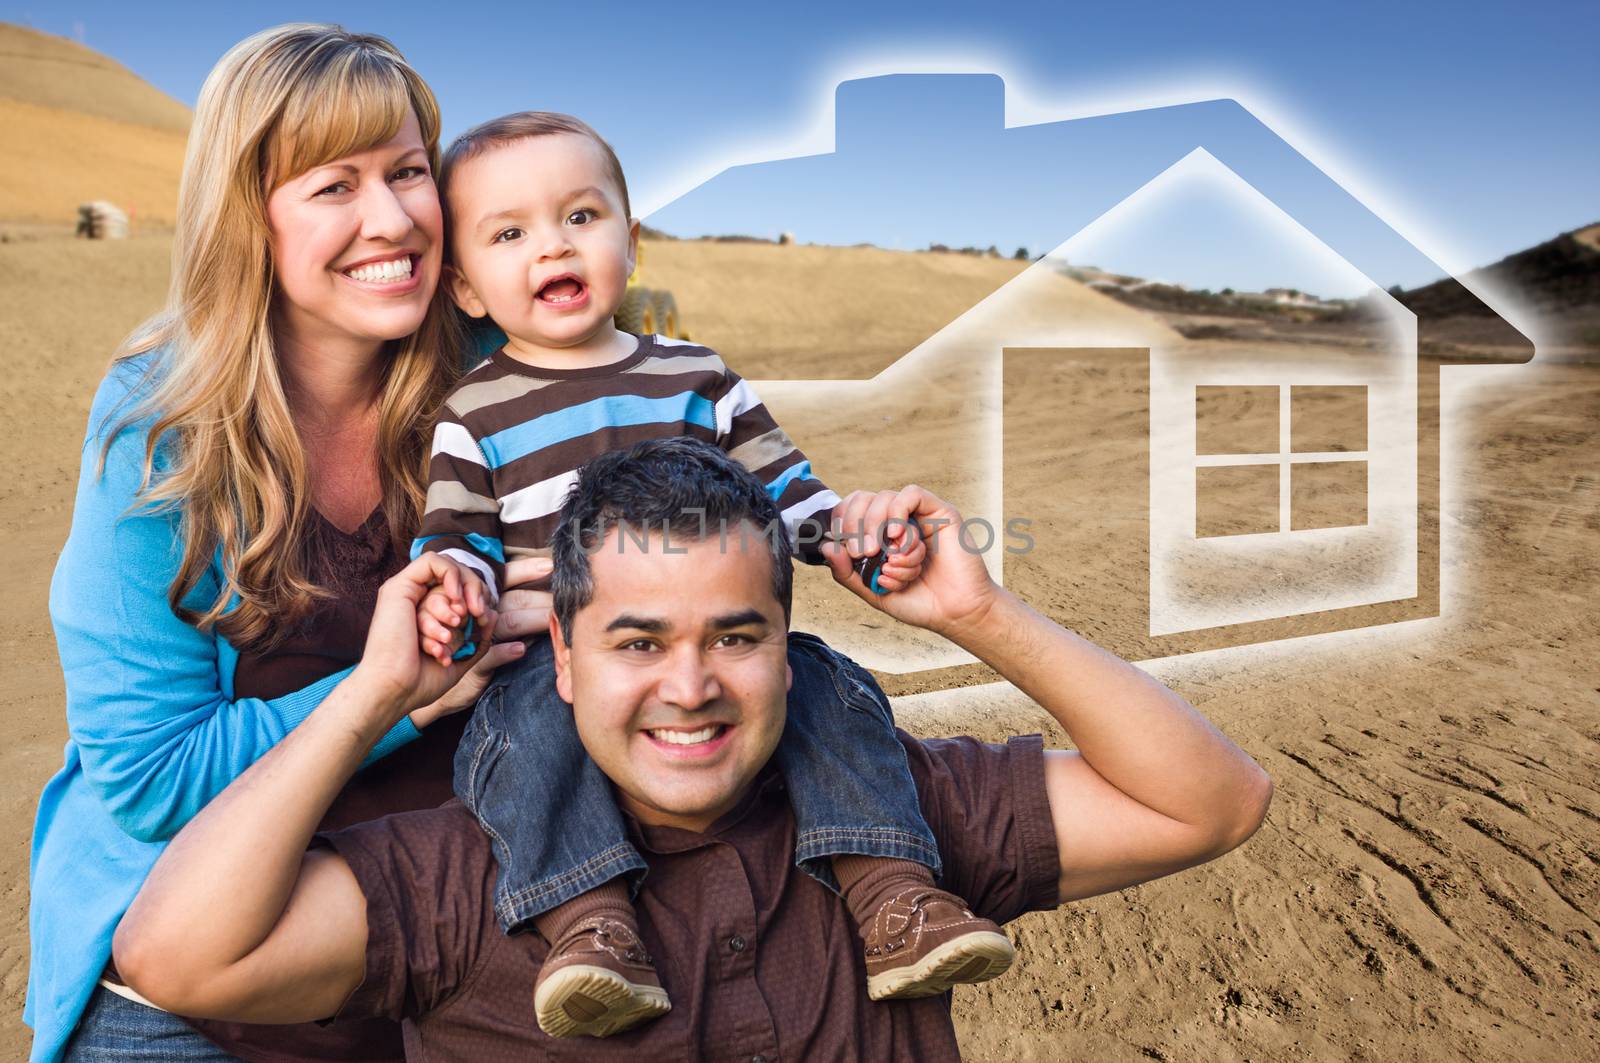 Happy Hopeful Mixed Race Family at Construction Site with Ghoosted House Behind.